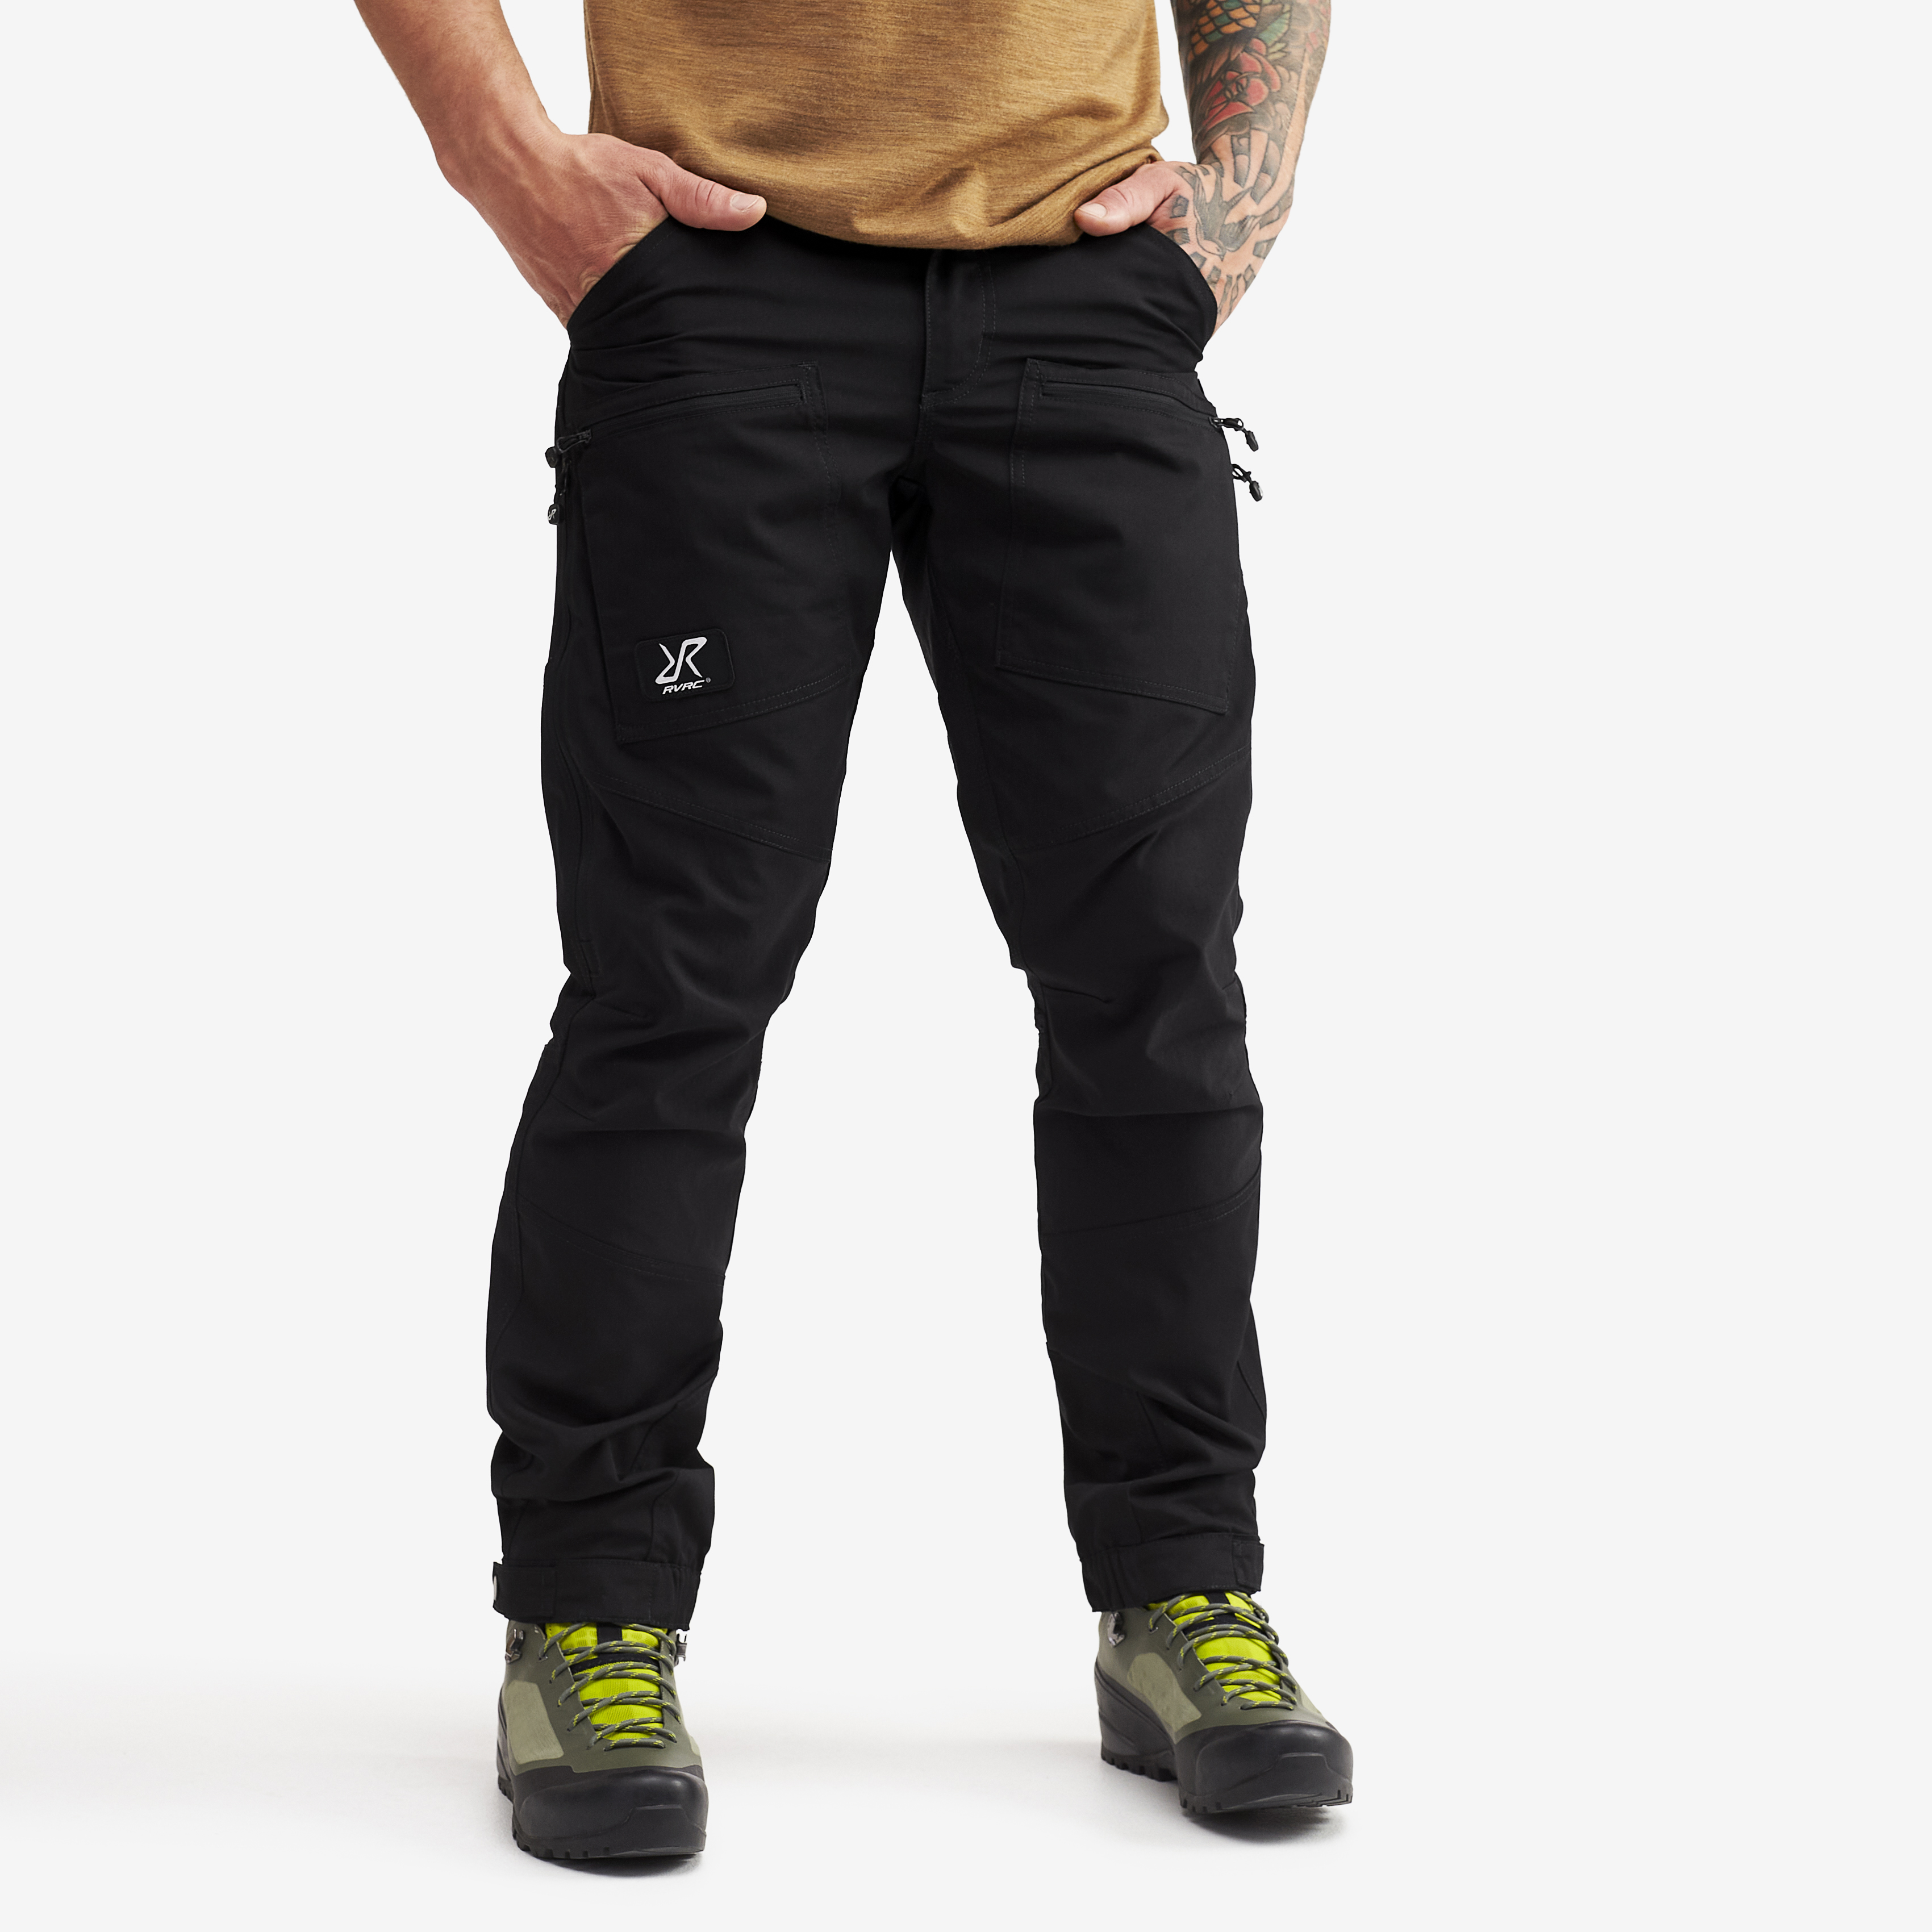 Nordwand Pro Short hiking trousers for men in black